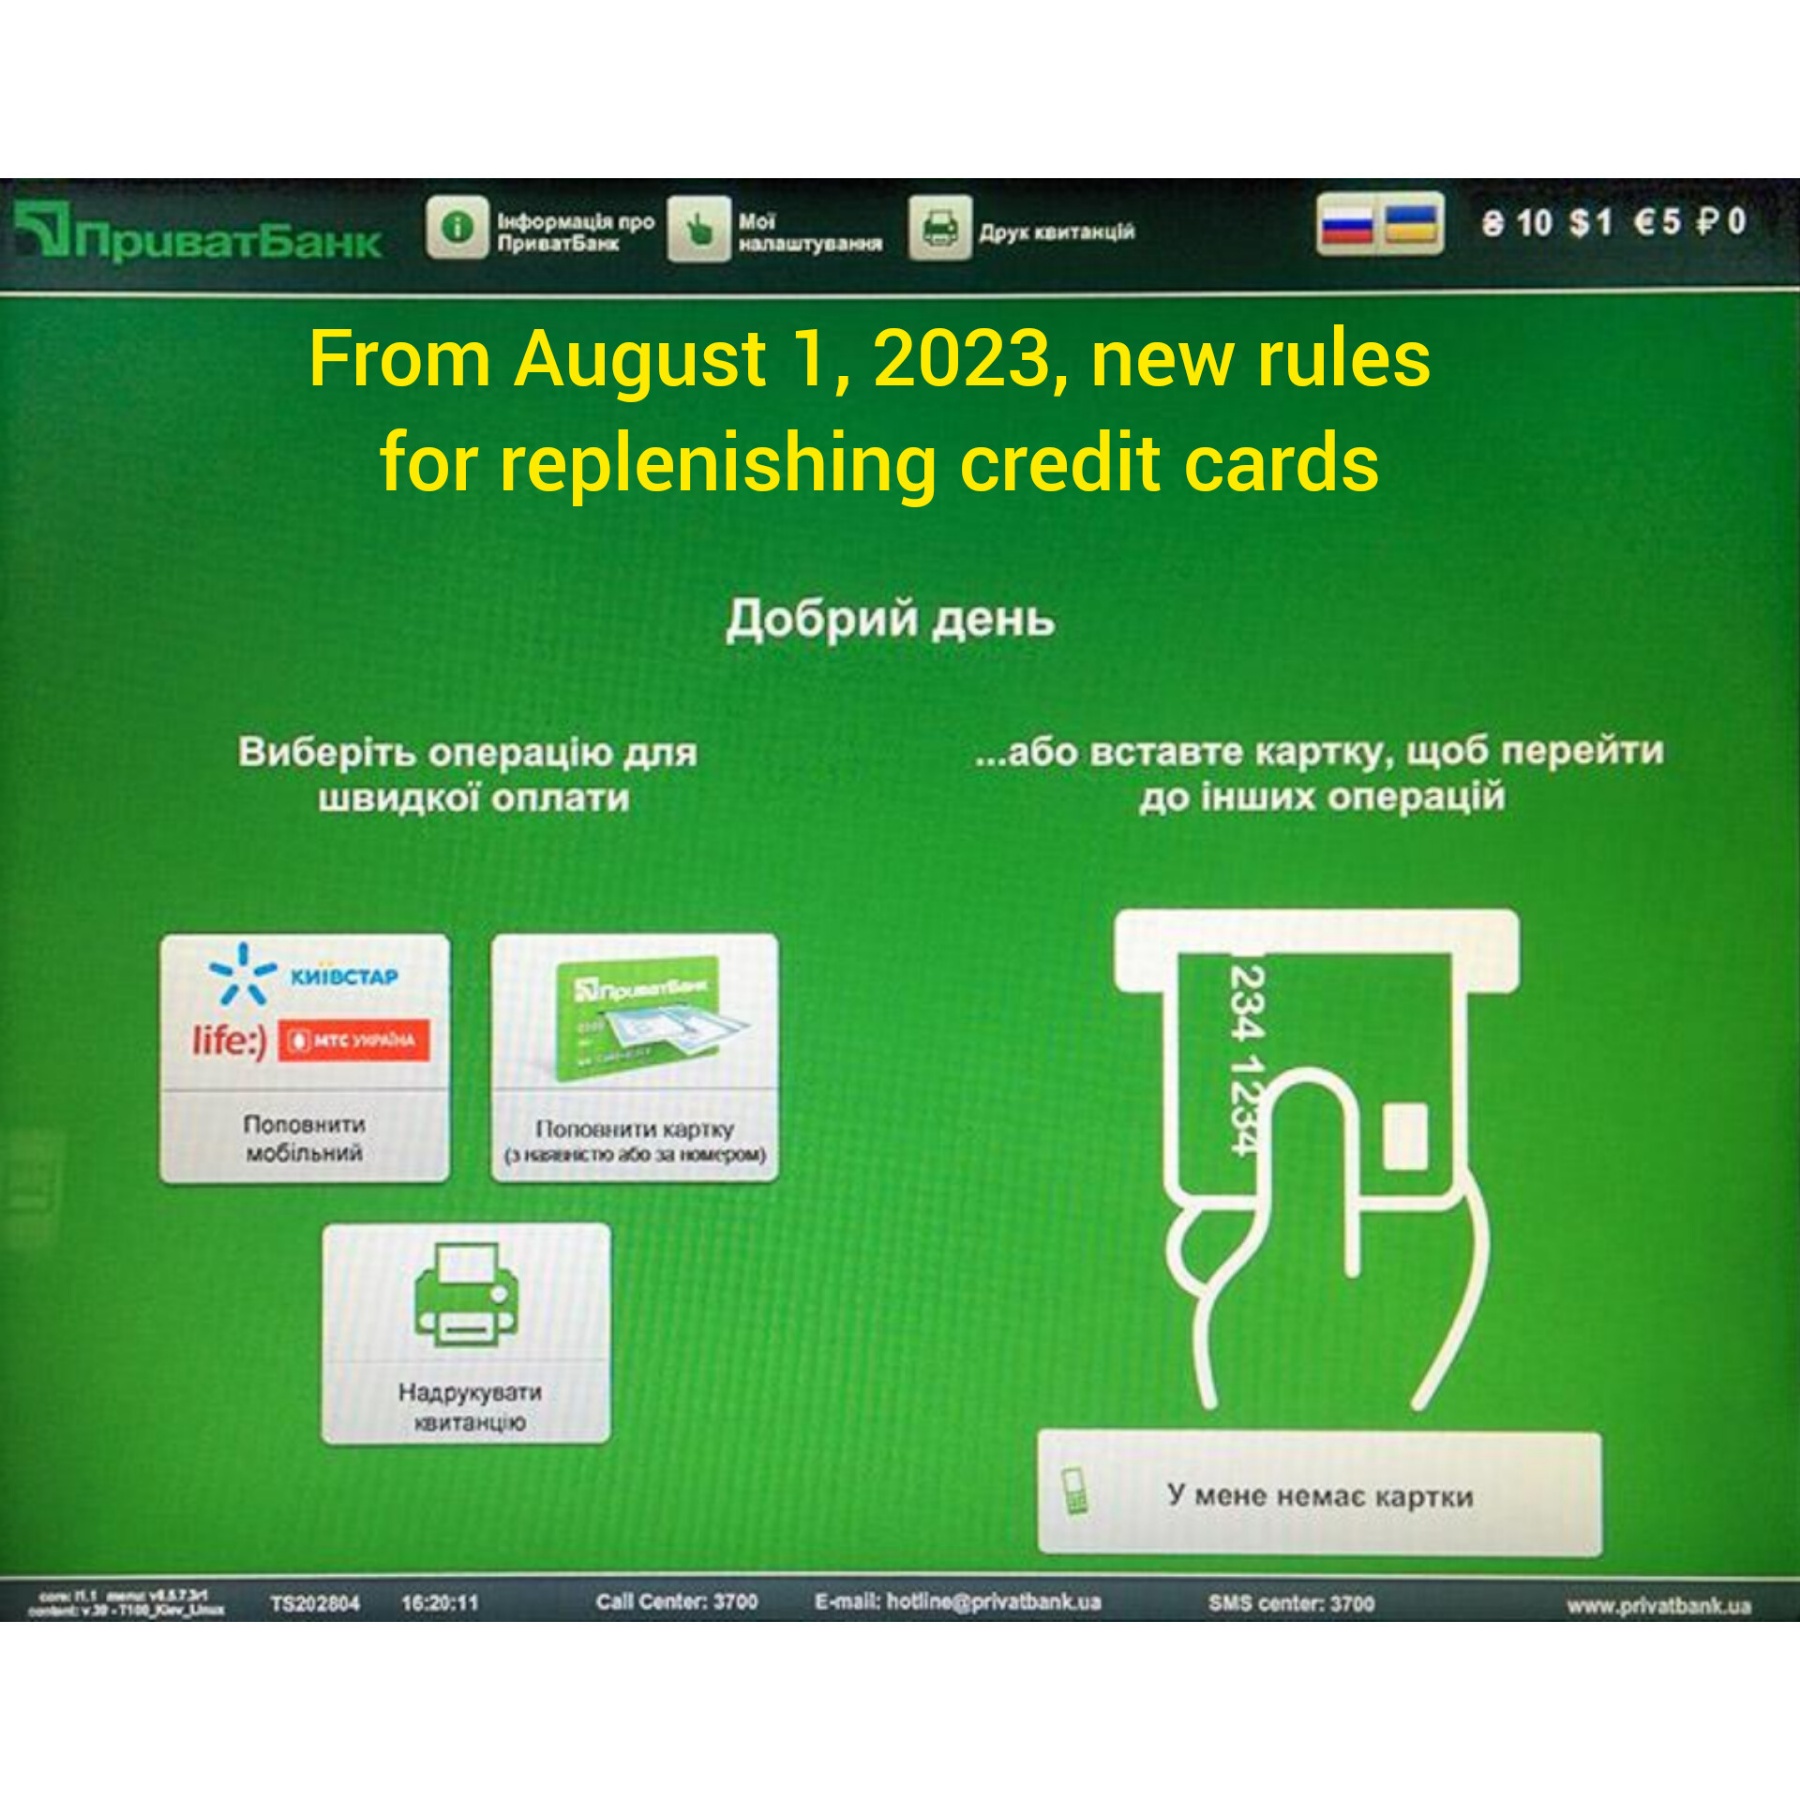 From August 1, 2023, you can top up the card through the terminal only with a smartphone